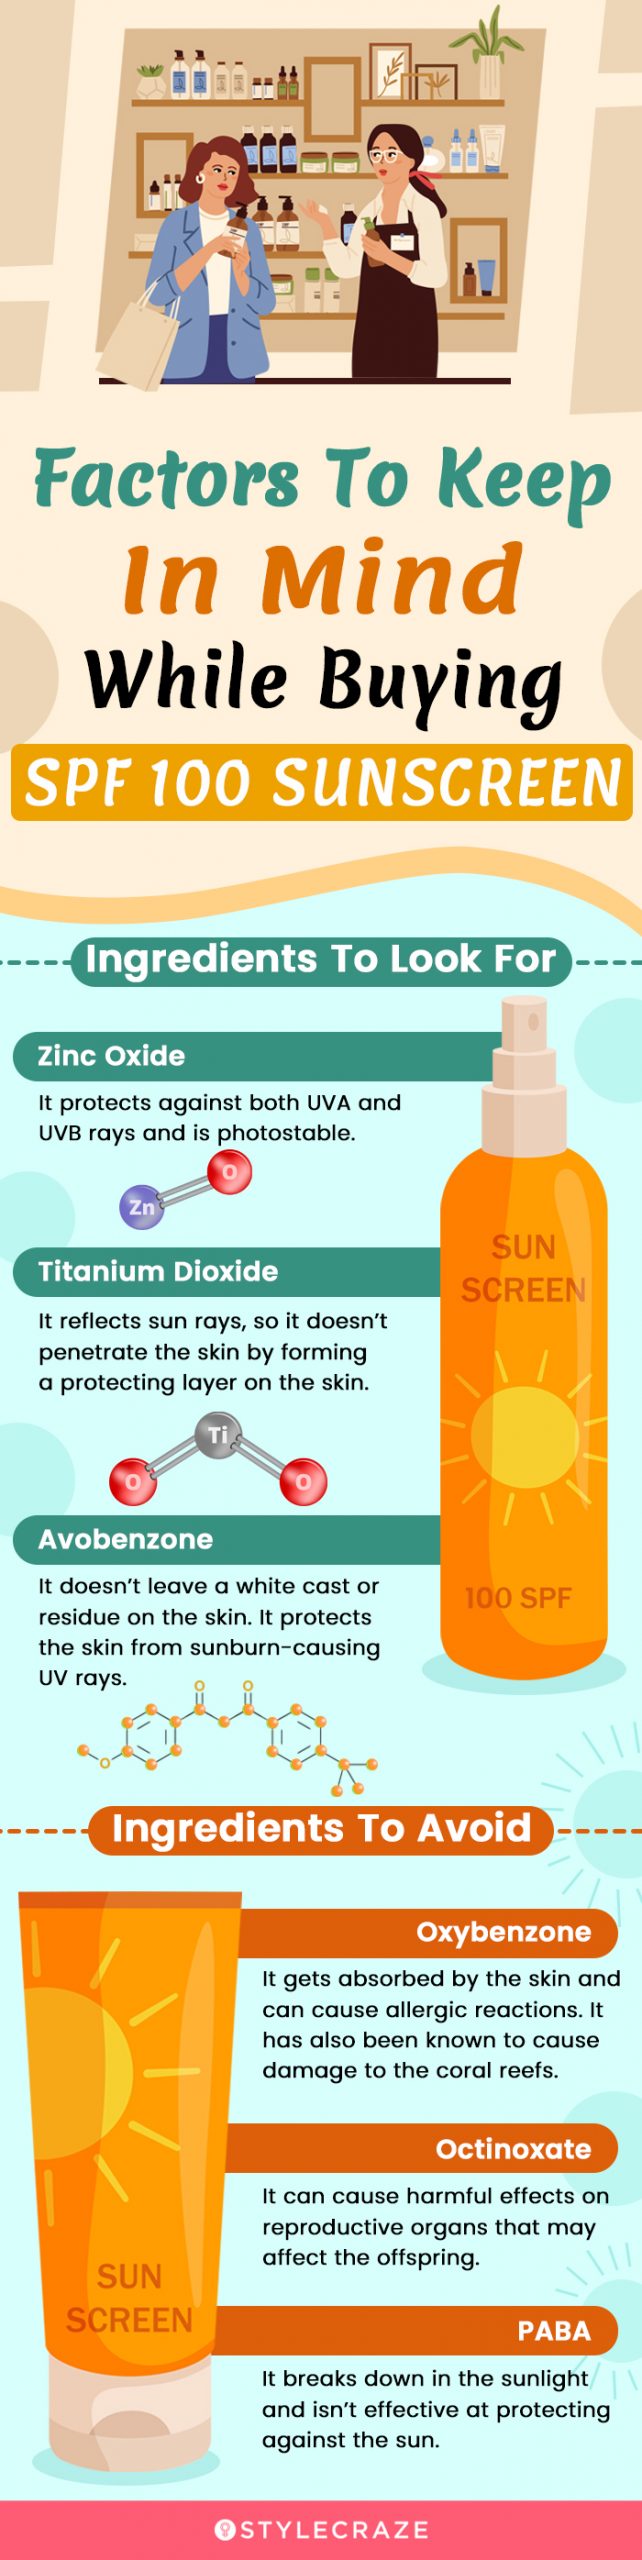 Factors To Keep In Mind While Buying SPF 100 Sunscreen [infographic]